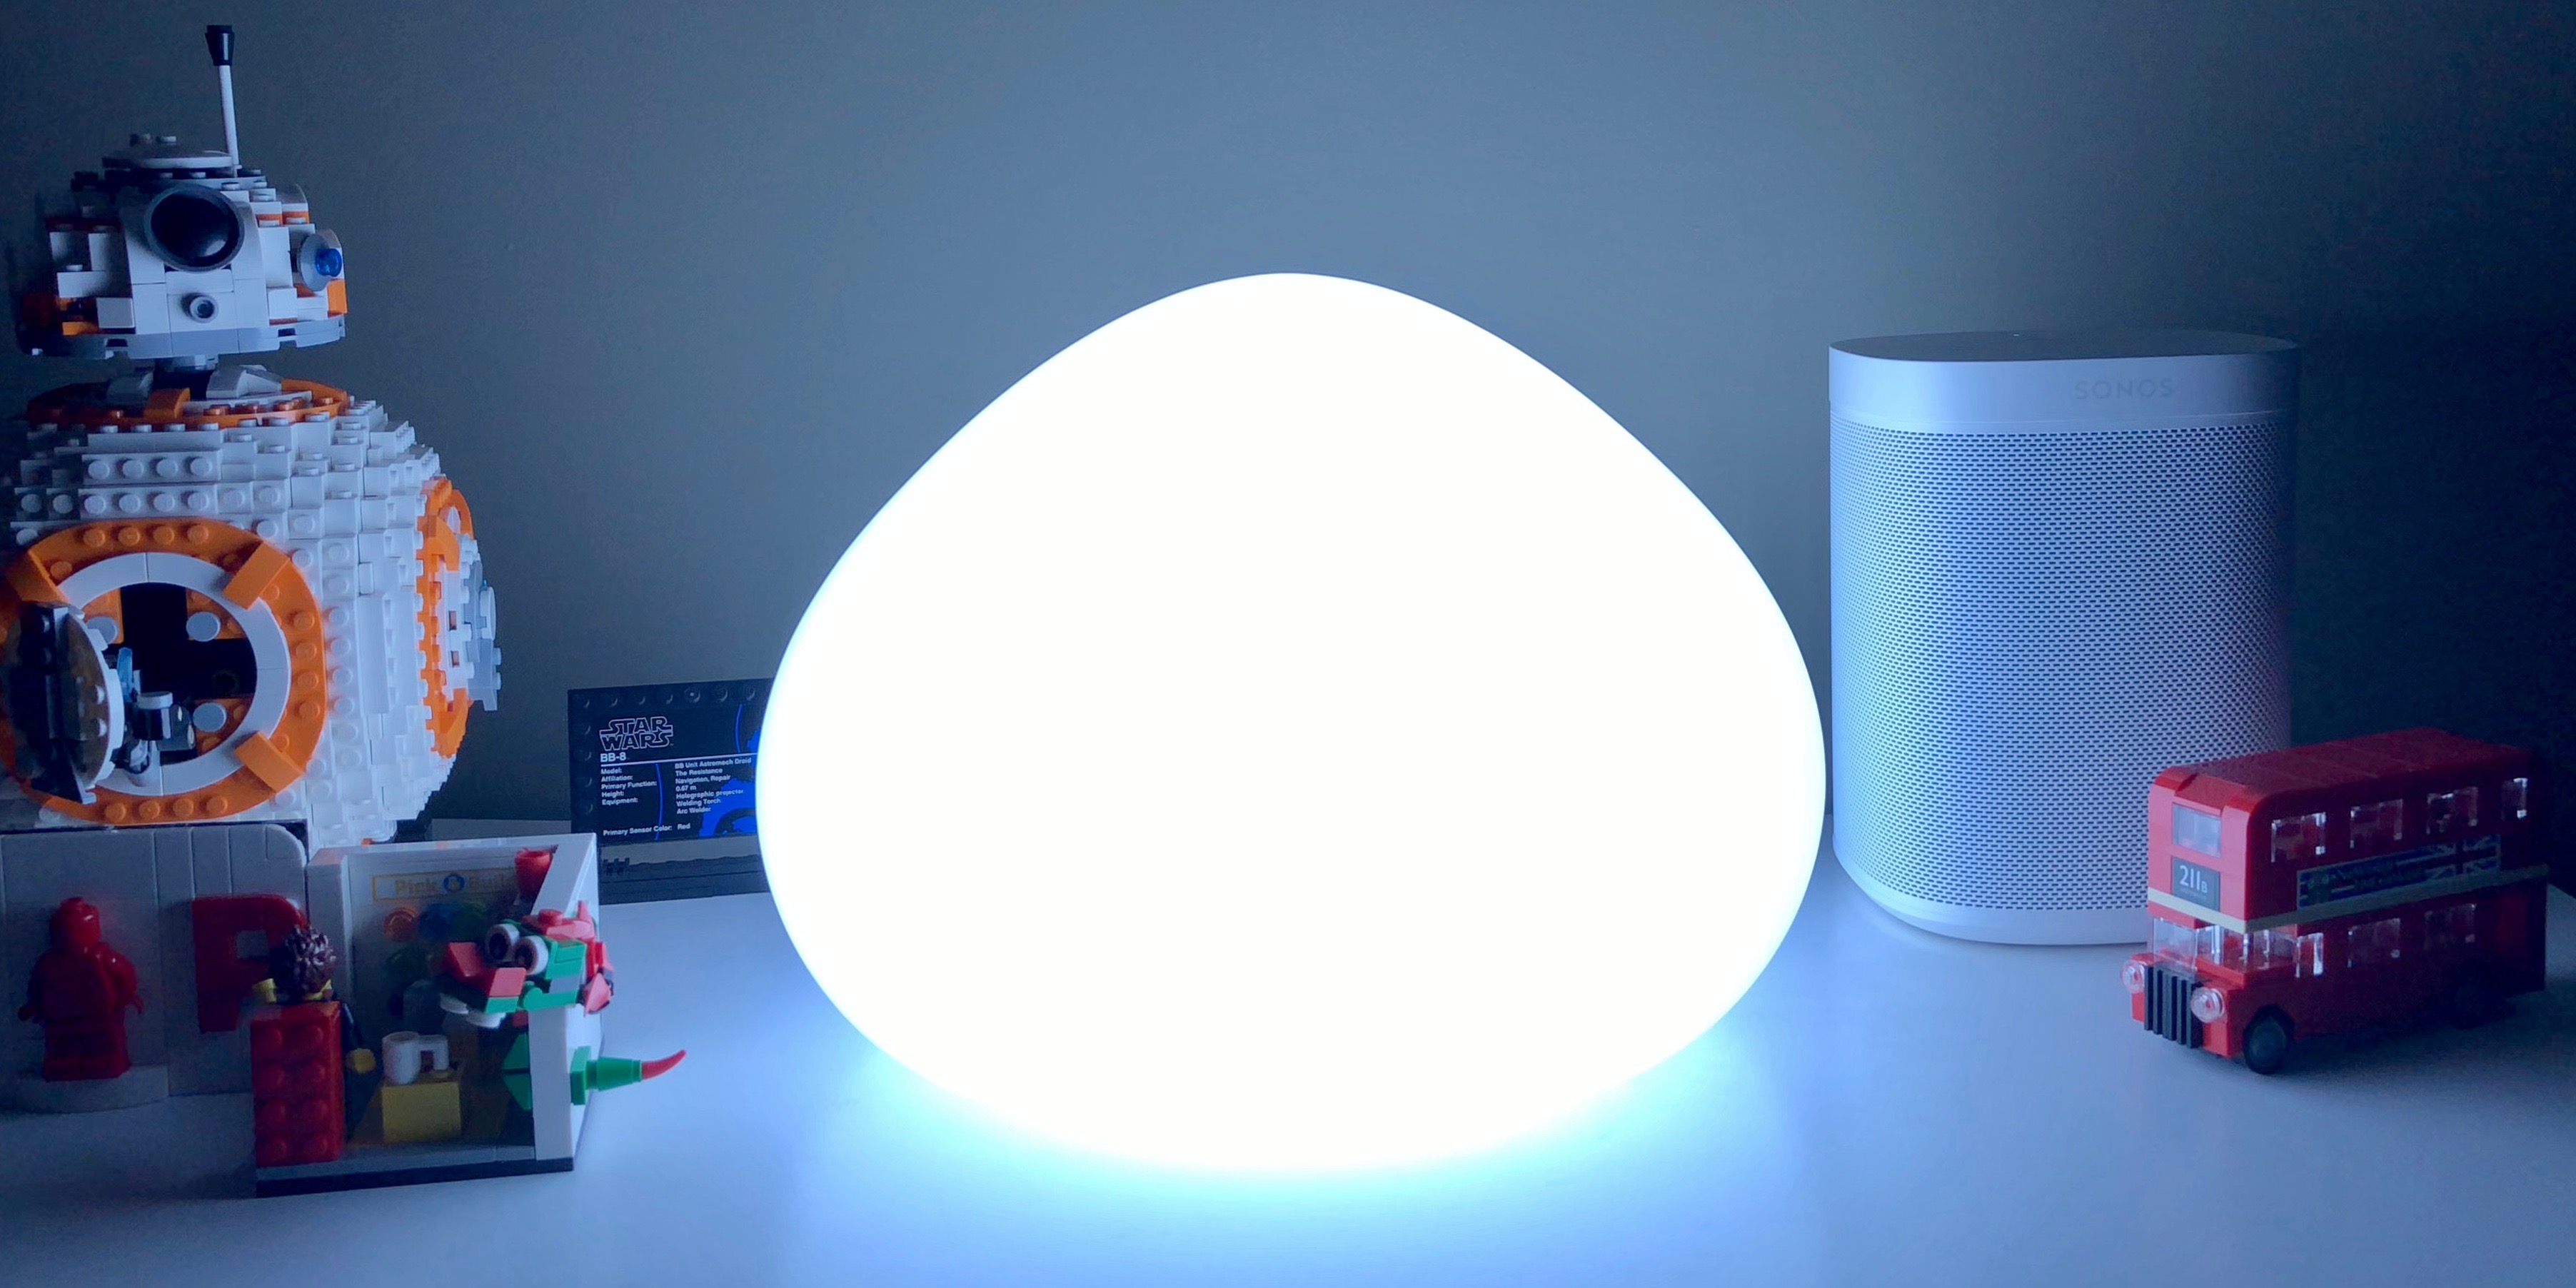 philips hue white ambiance table lamp